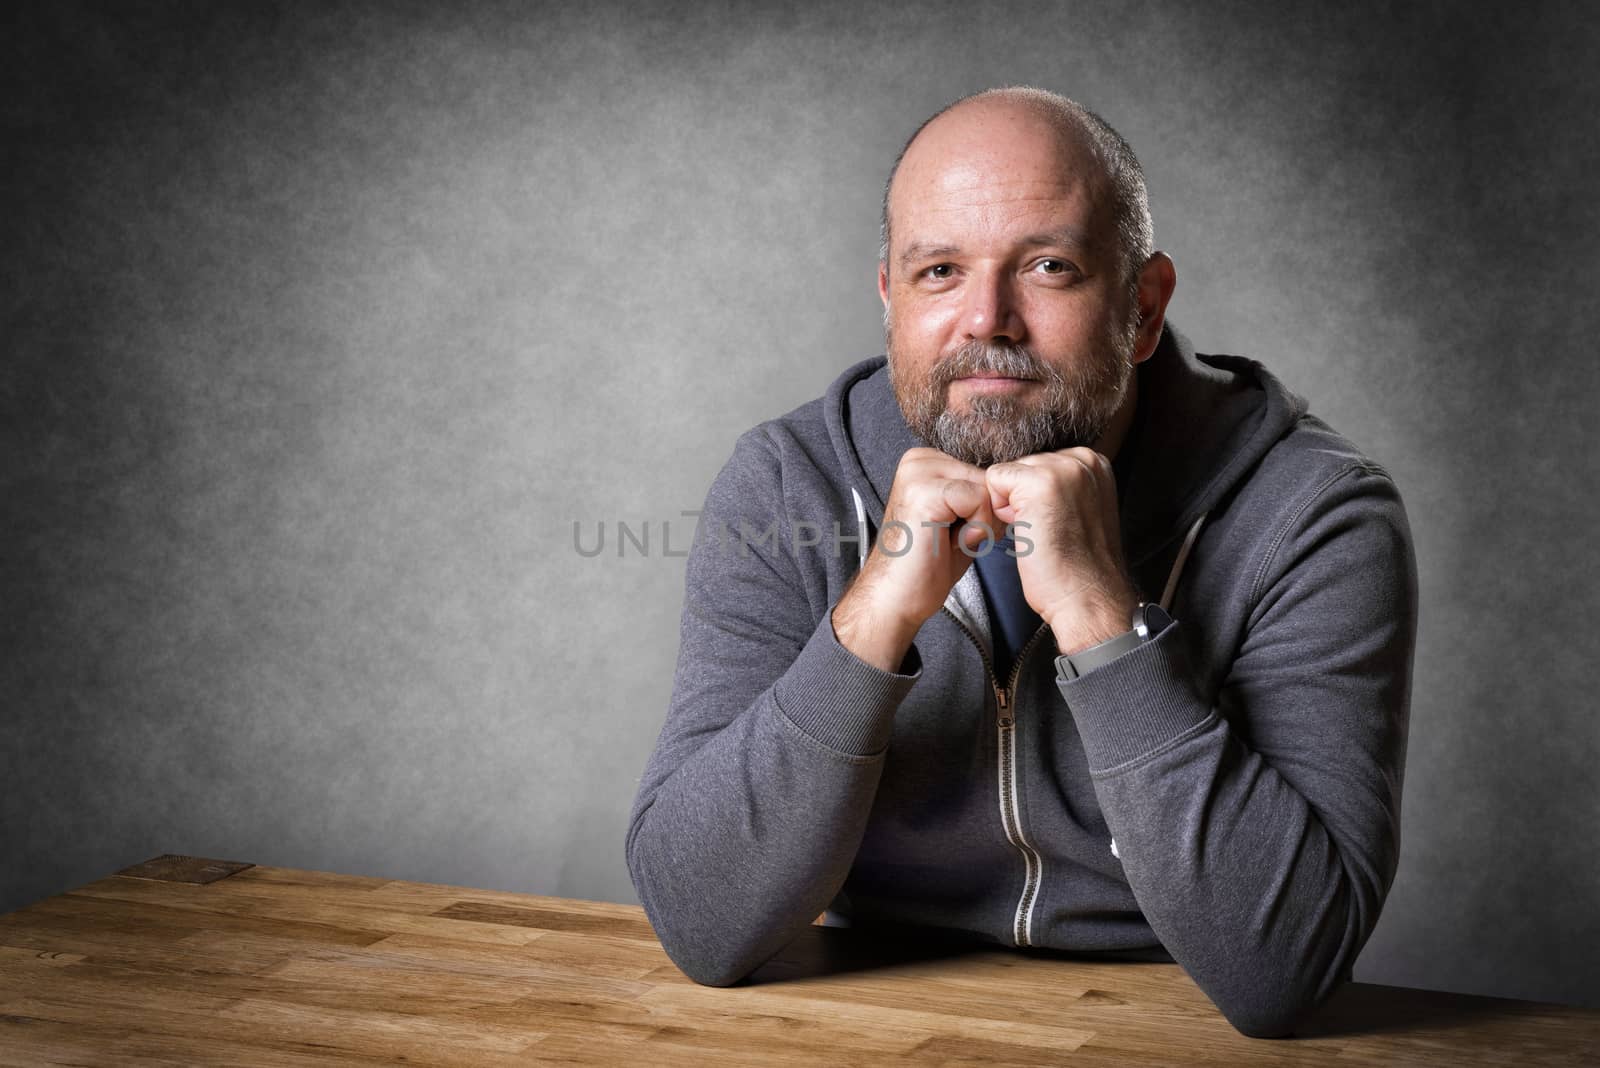 Portrait of a friendly looking, balding and unshaven man sitting on a wooden table